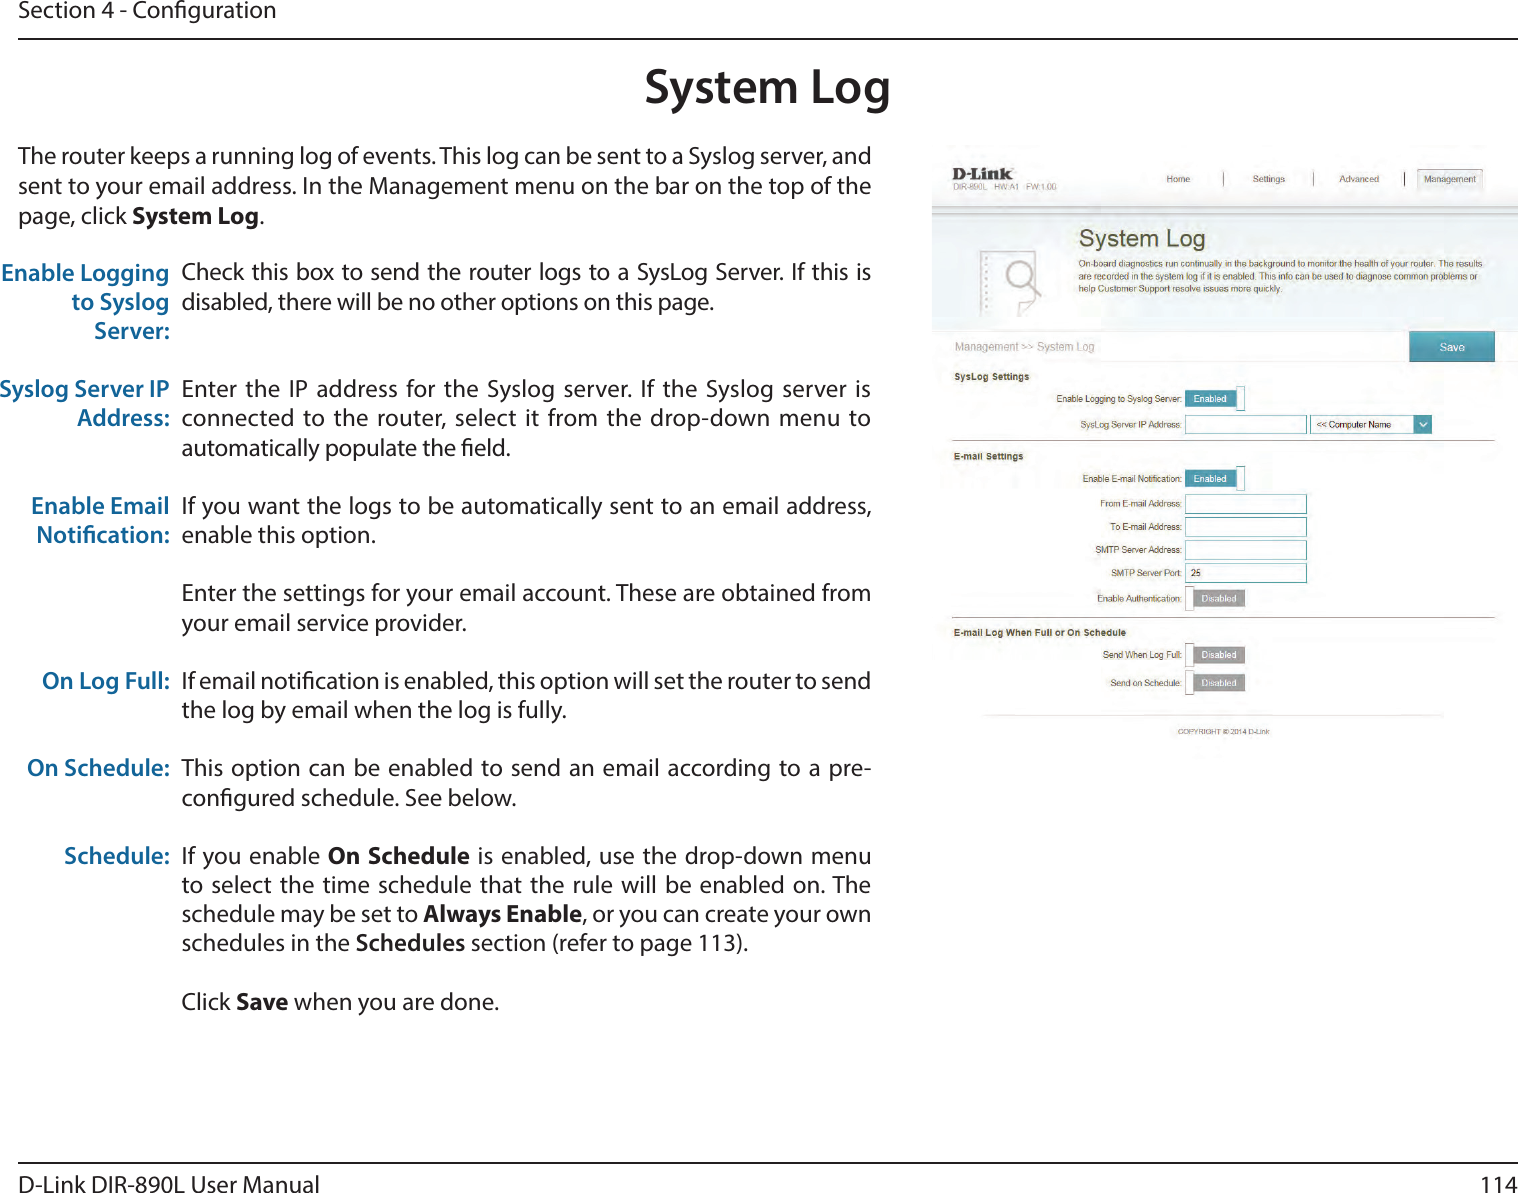 114D-Link DIR-890L User ManualSection 4 - CongurationSystem LogCheck this box to send the router logs to a SysLog Server. If this is disabled, there will be no other options on this page.Enter the IP address for the Syslog server. If the Syslog server is connected to the router, select it from the drop-down menu to automatically populate the eld. If you want the logs to be automatically sent to an email address, enable this option.Enter the settings for your email account. These are obtained from your email service provider.If email notication is enabled, this option will set the router to send the log by email when the log is fully.This option can be enabled to send an email according to a pre-congured schedule. See below.If you enable On Schedule is enabled, use the drop-down menu to select the time schedule that the rule will be enabled on. The schedule may be set to Always Enable, or you can create your own schedules in the Schedules section (refer to page 113).Click Save when you are done.Enable Logging to Syslog Server:Syslog Server IP Address:Enable Email Notication:On Log Full:On Schedule:Schedule:The router keeps a running log of events. This log can be sent to a Syslog server, and sent to your email address. In the Management menu on the bar on the top of the page, click System Log. 